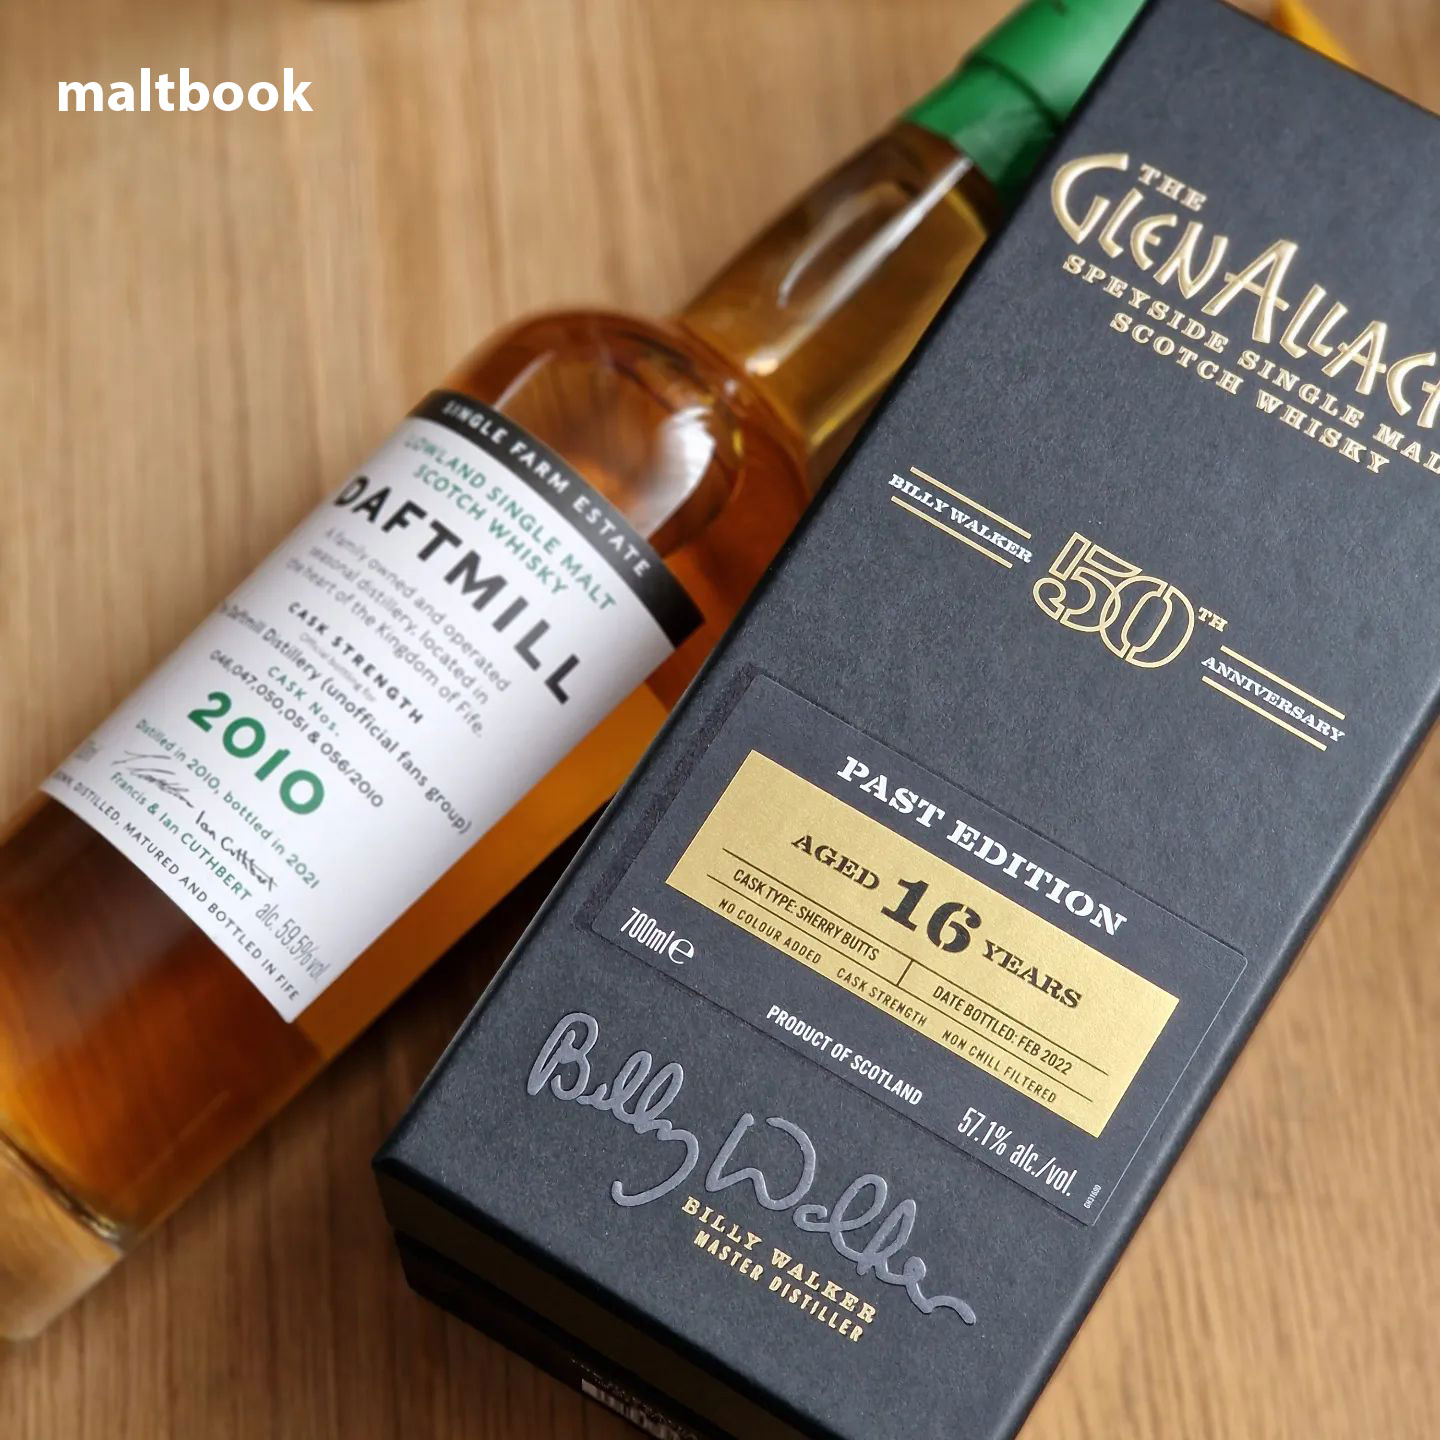 GlenAllachie 16 Year Old 50th Anniversary